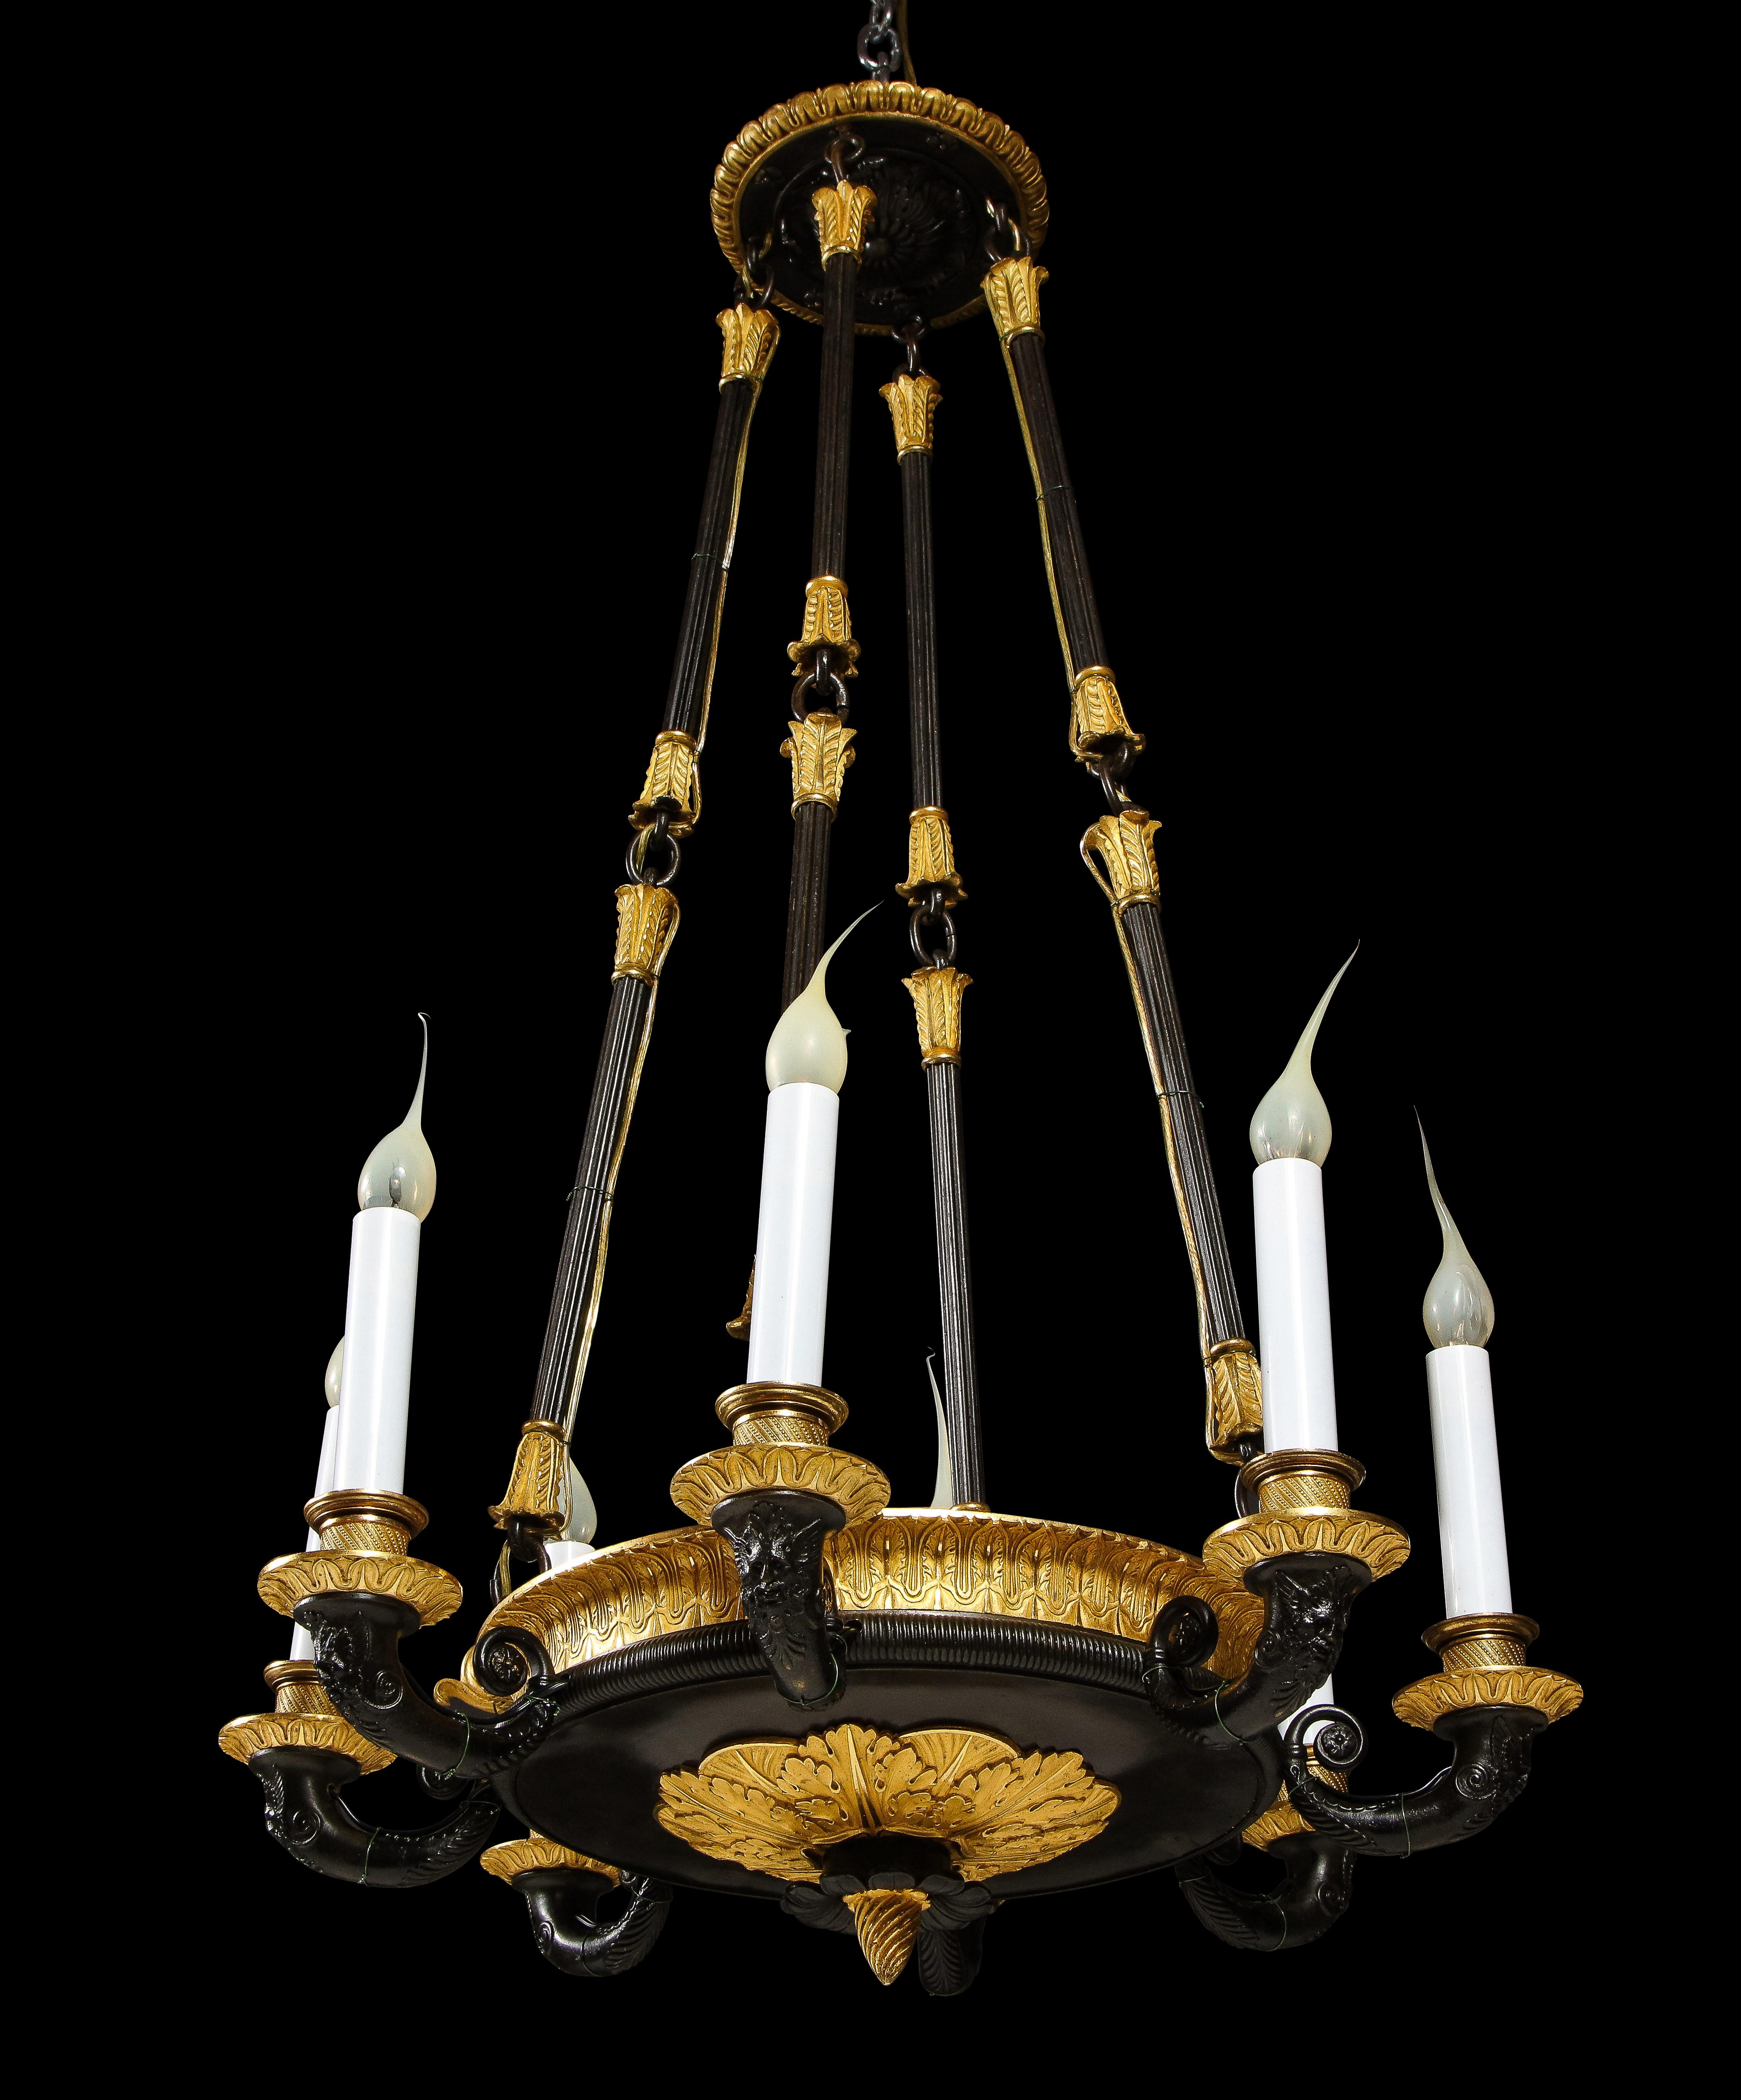 Antique French Empire Style Gilt and Patinated Bronze Chandelier For Sale 14